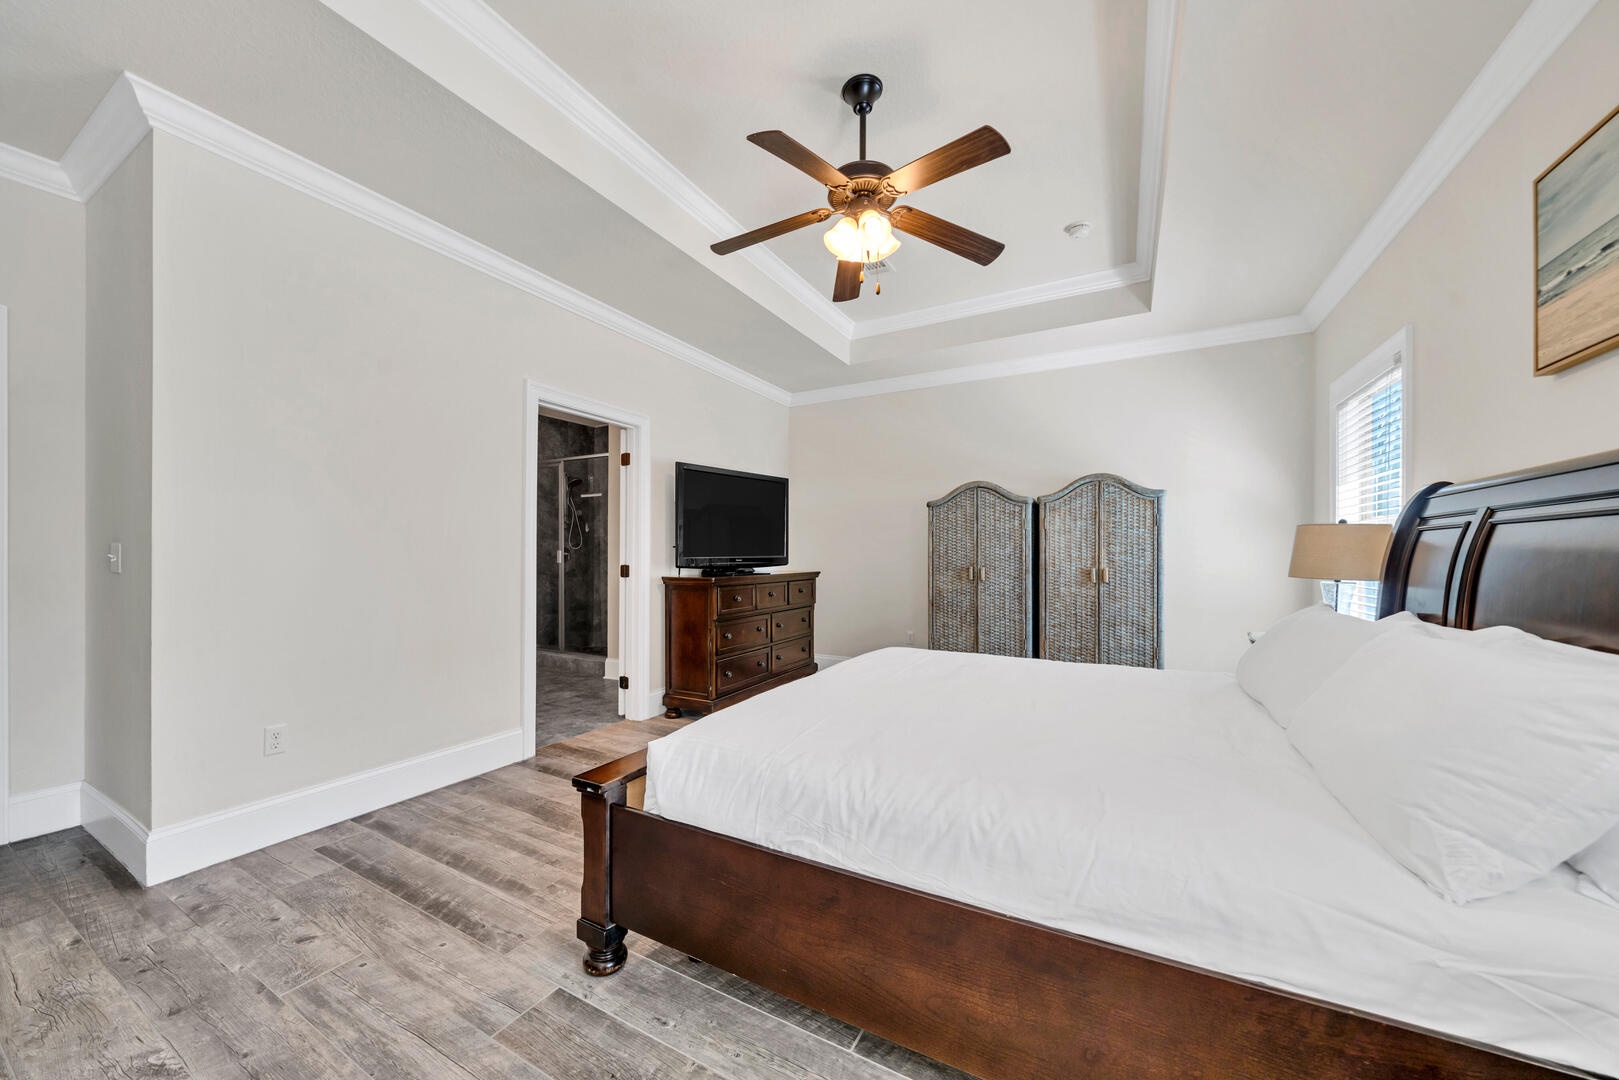 Master suite with king bed and private bathroom!